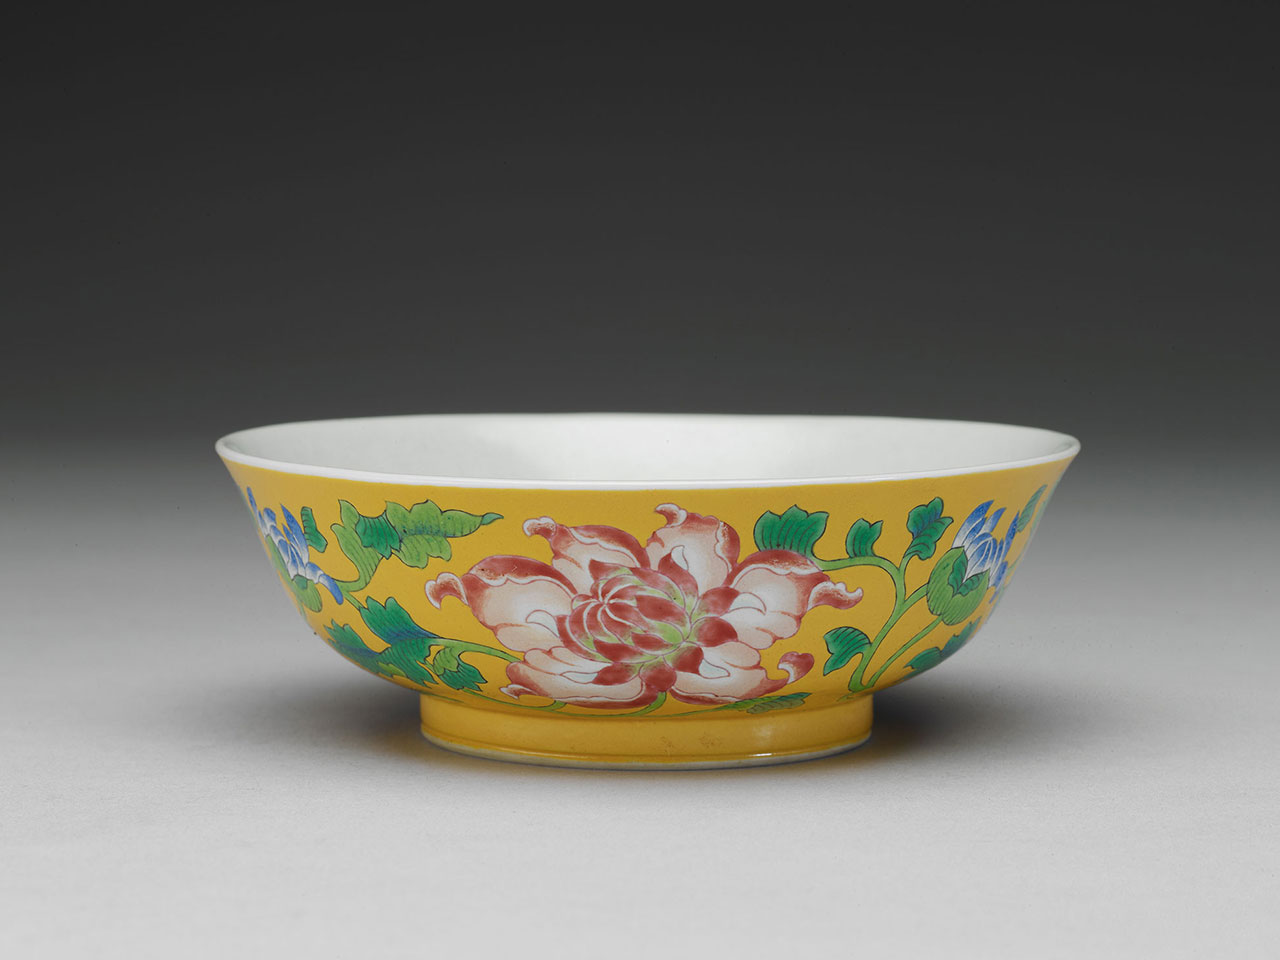 Bowl with flowers on a yellow ground in painted enamels